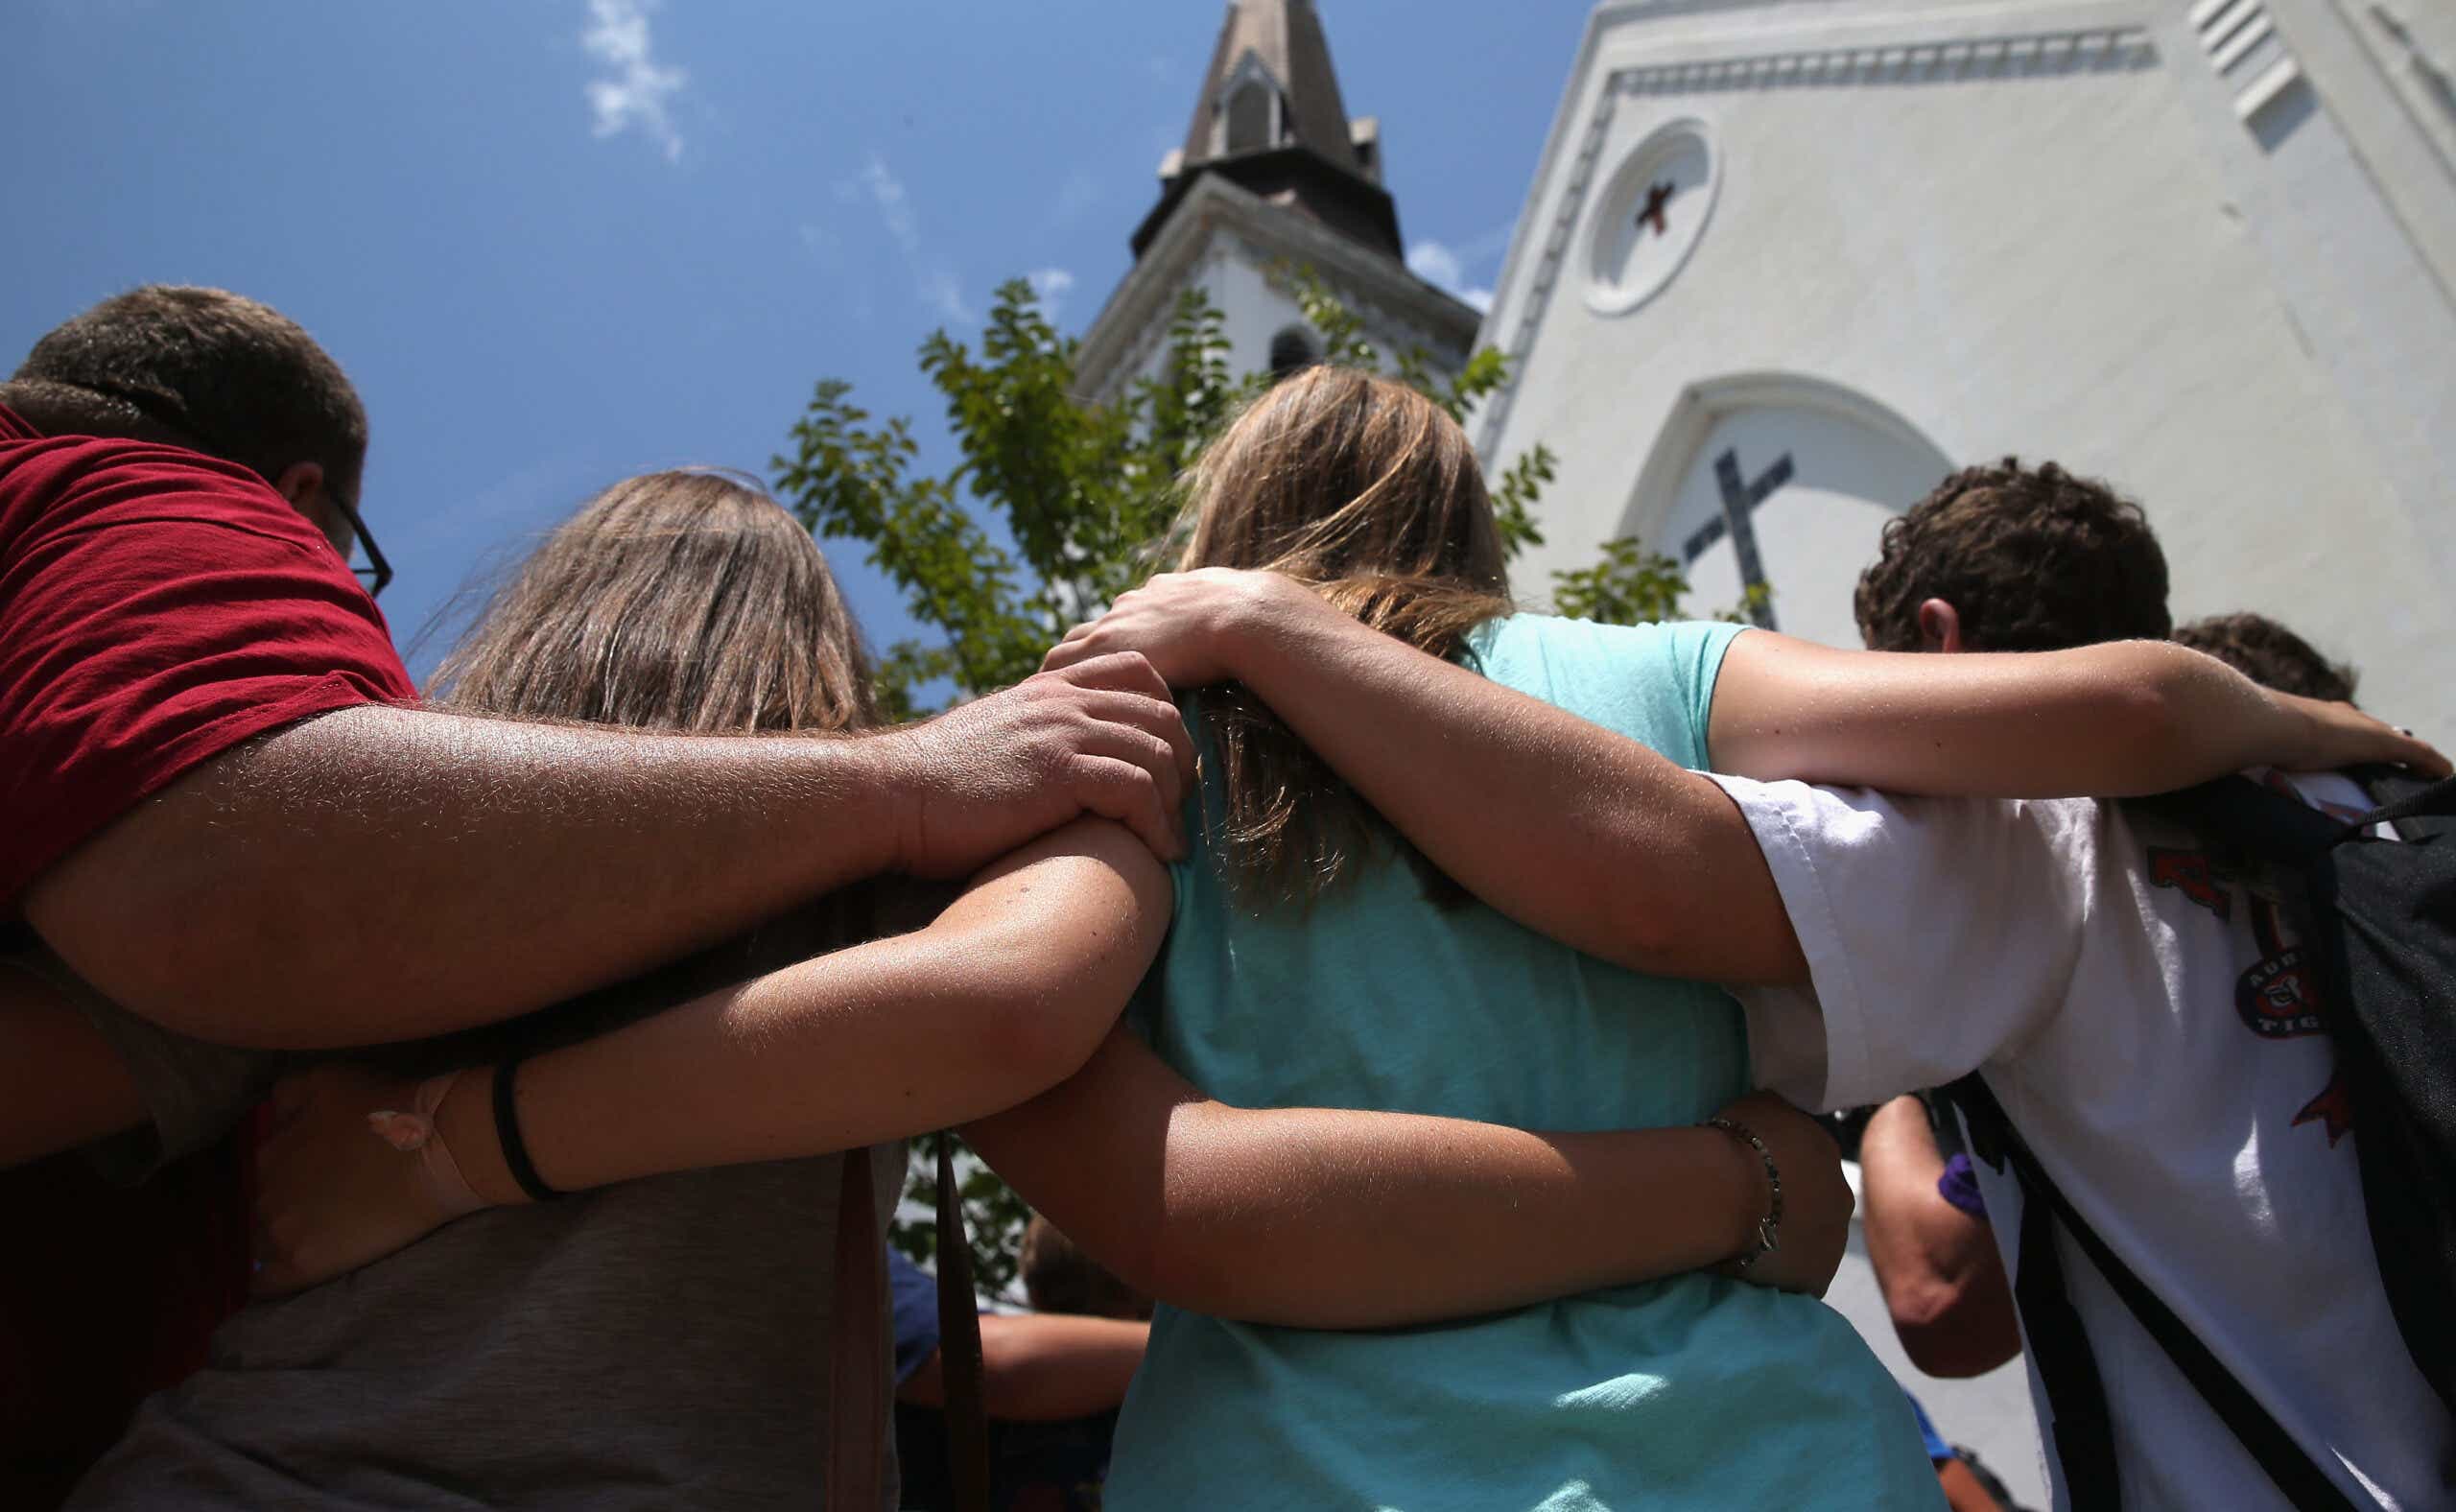 A church youth group from Douthan, Alabama prays in front of the Emanuel AME Church on the one-month anniversary of the mass shooting on July 17, 2015 in Charleston, South Carolina